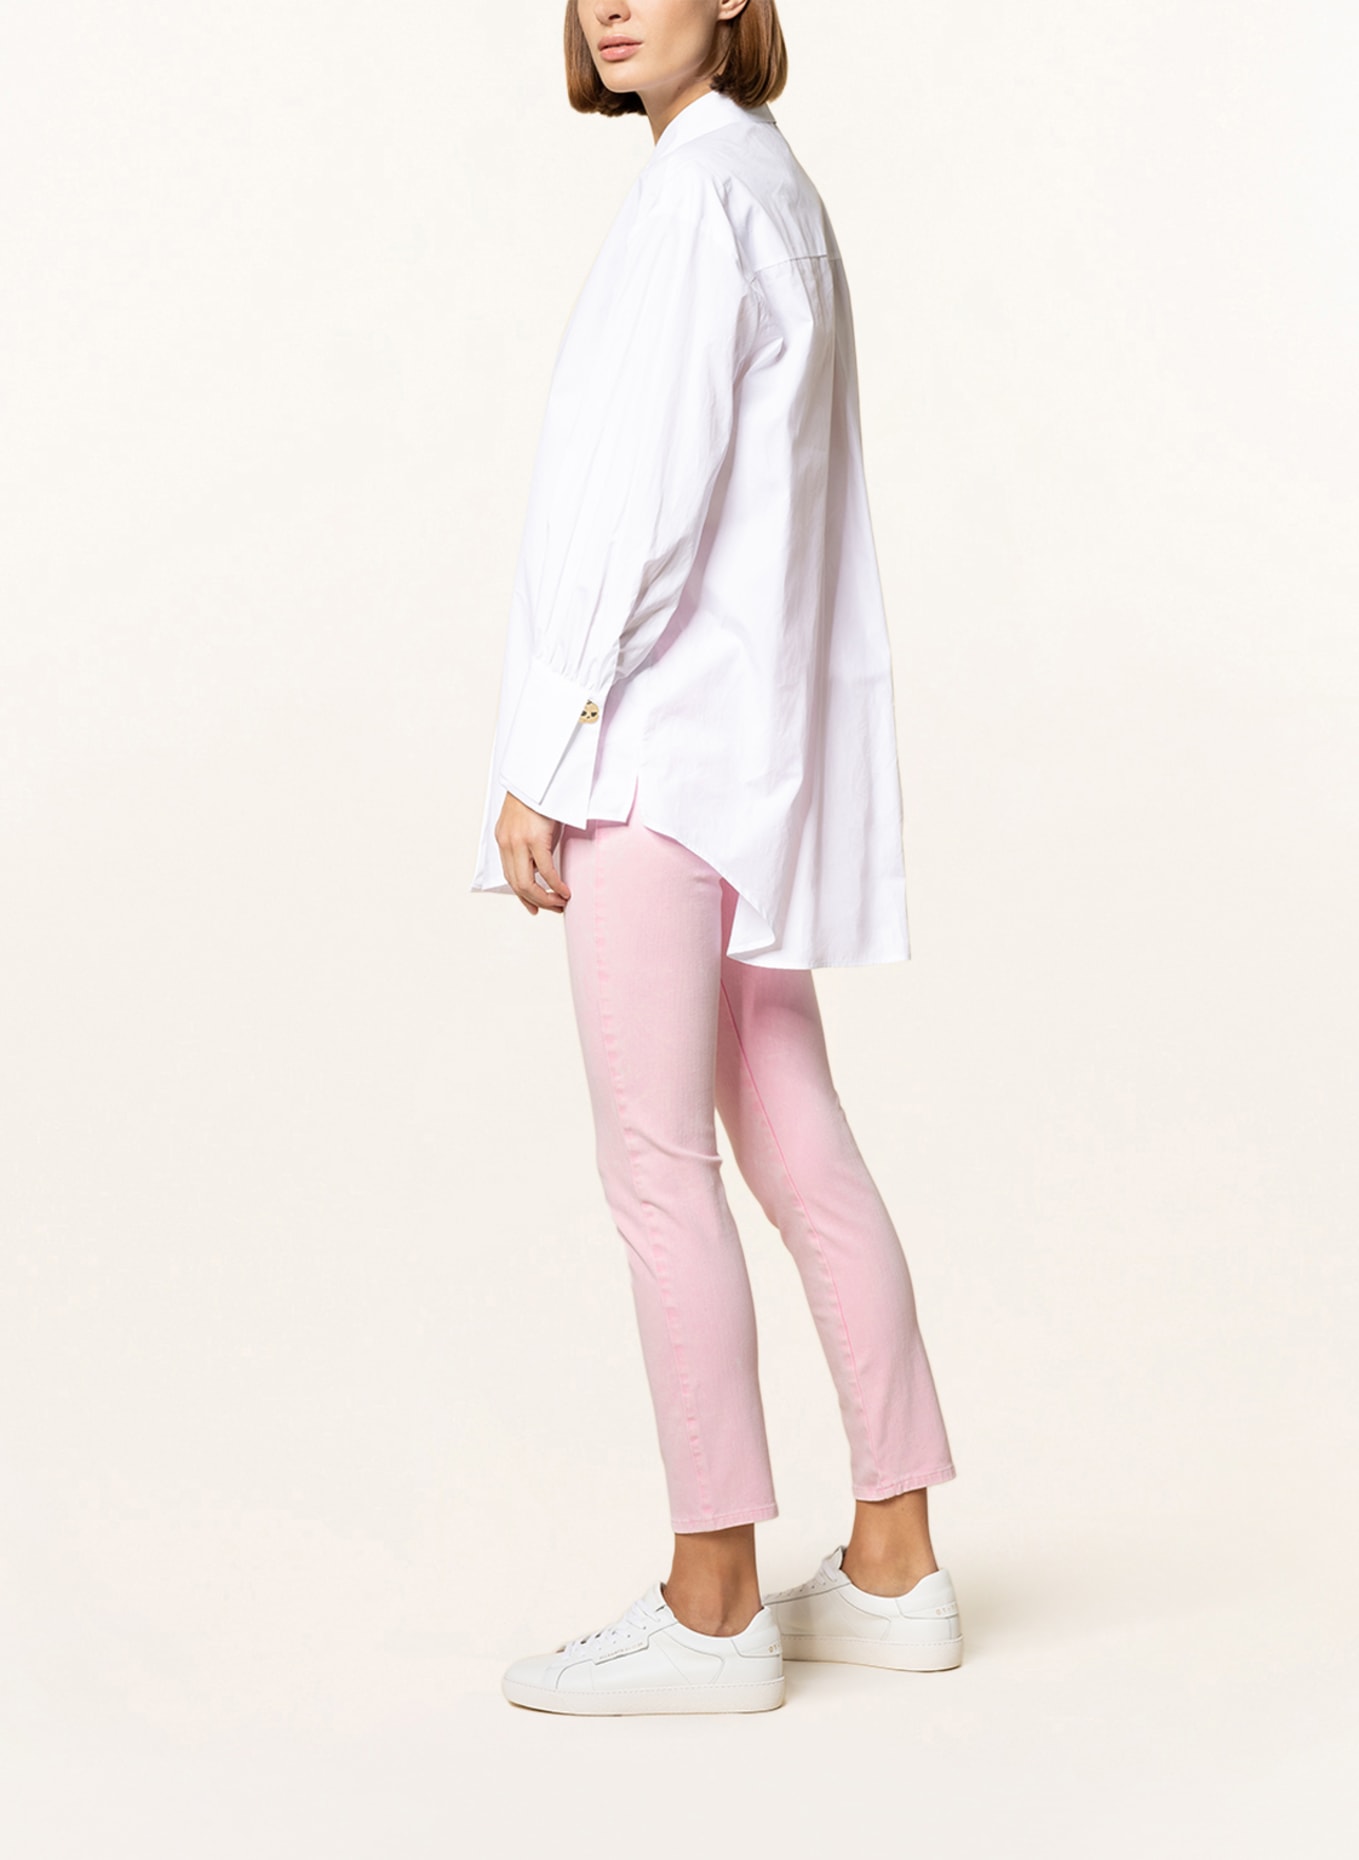 ITEM m6 Flared jeans with shaping effect, Color: 753 washed out pink (Image 4)